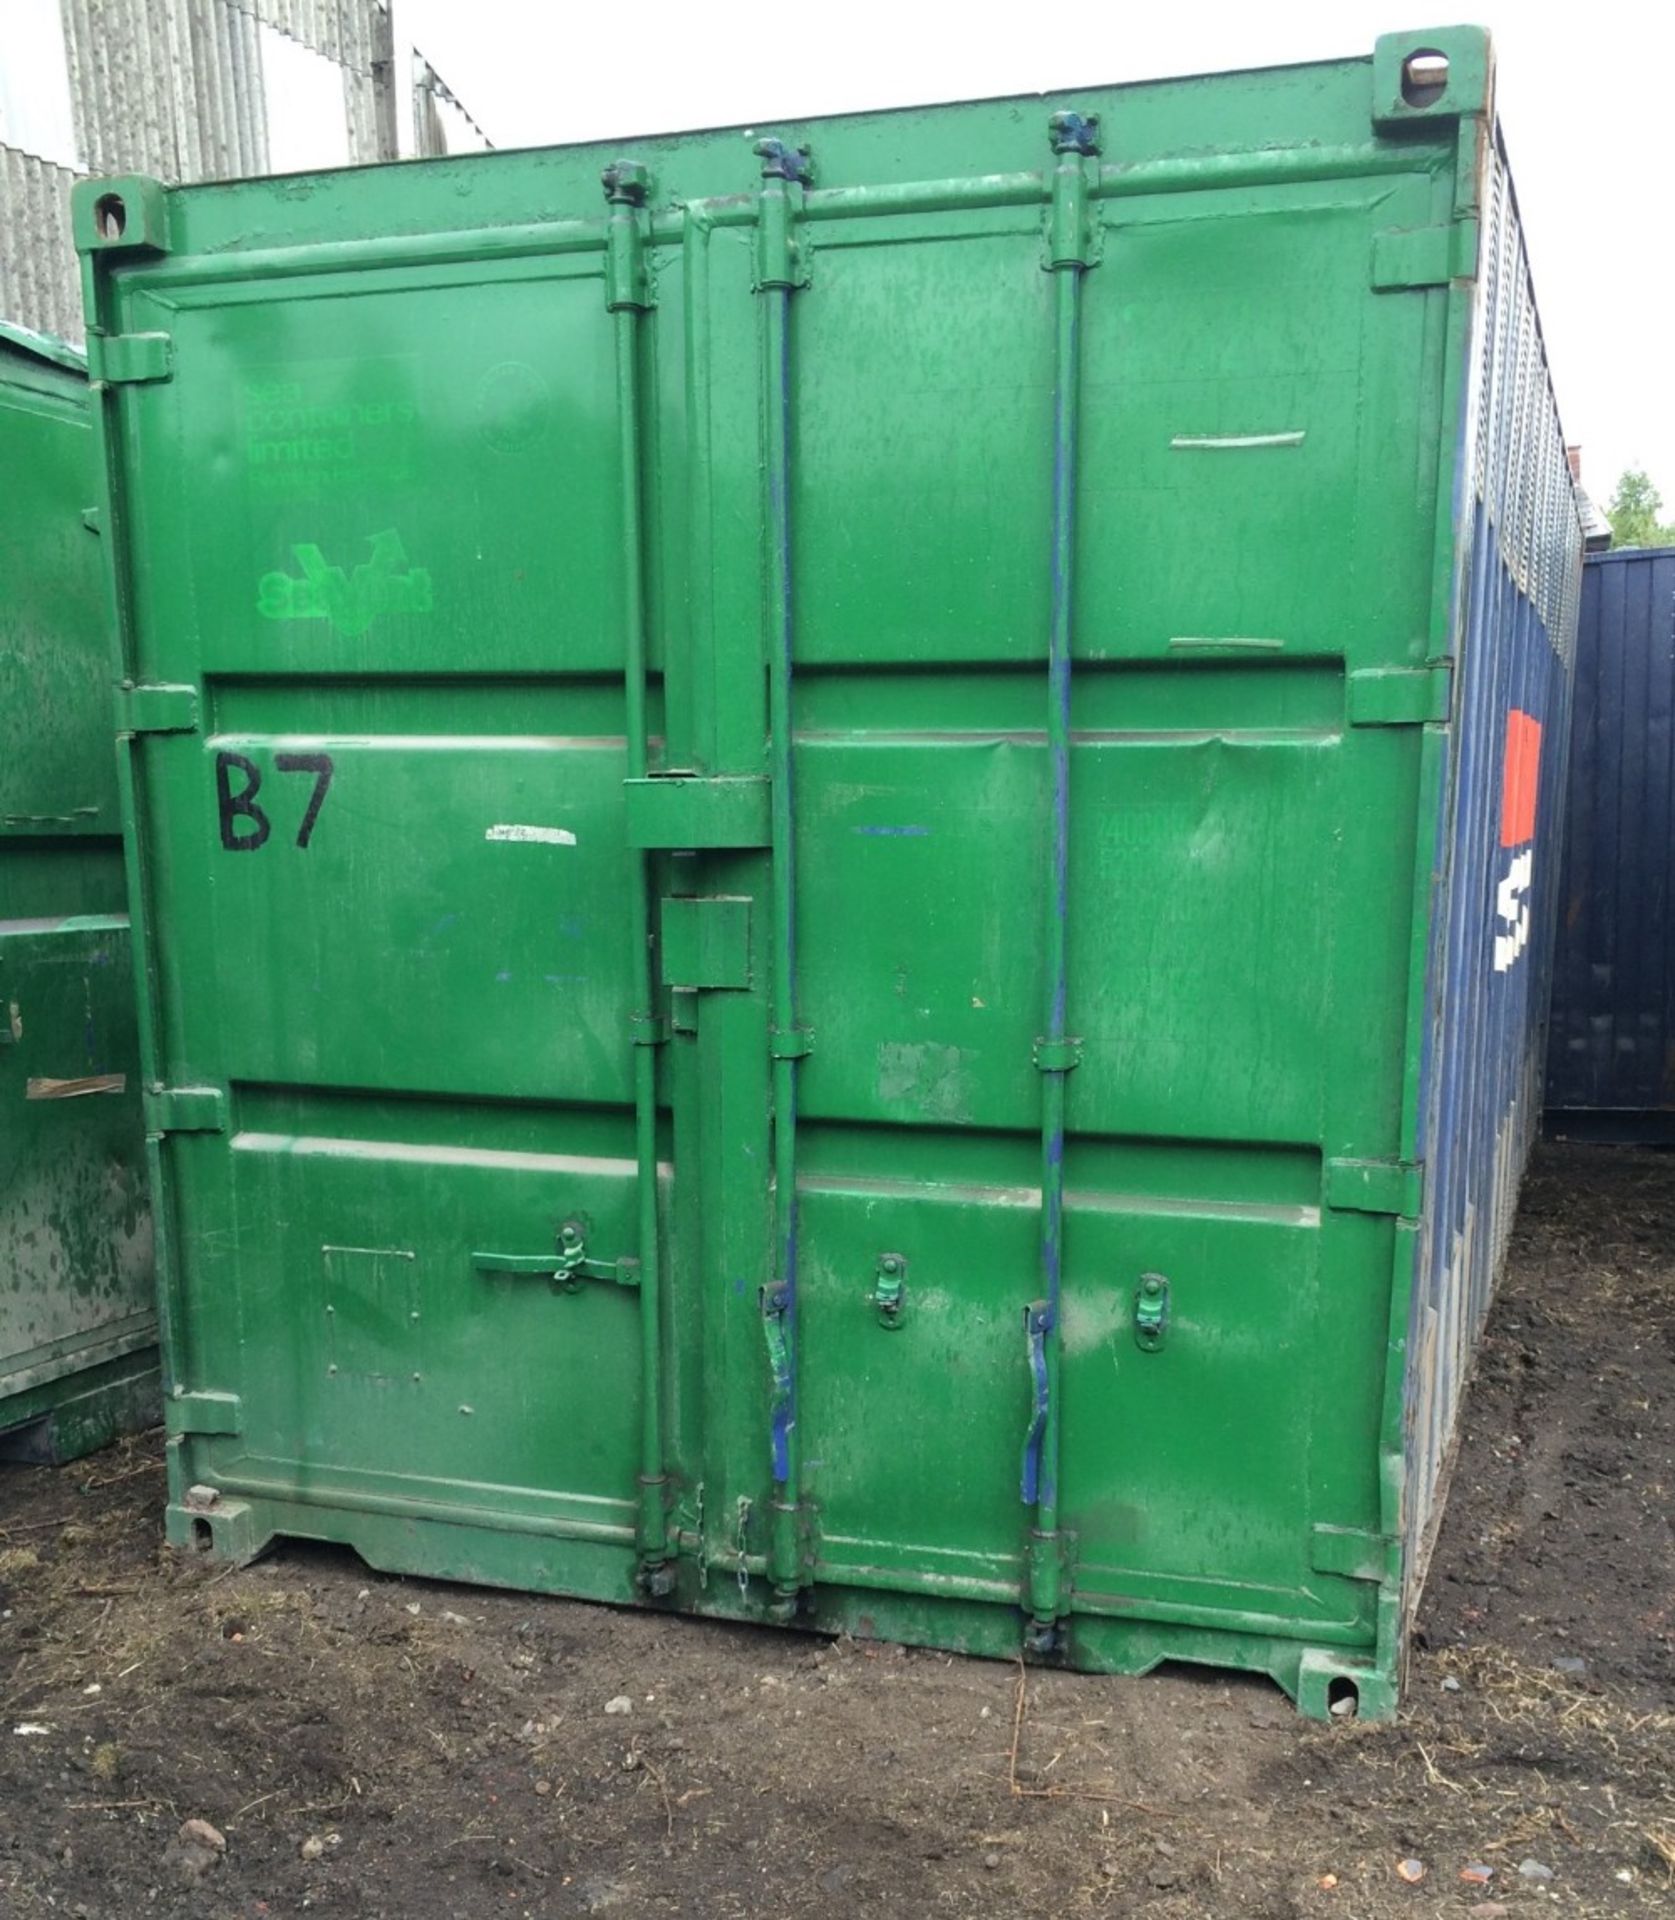 20 x 8 foot double door storage container with locking box B7